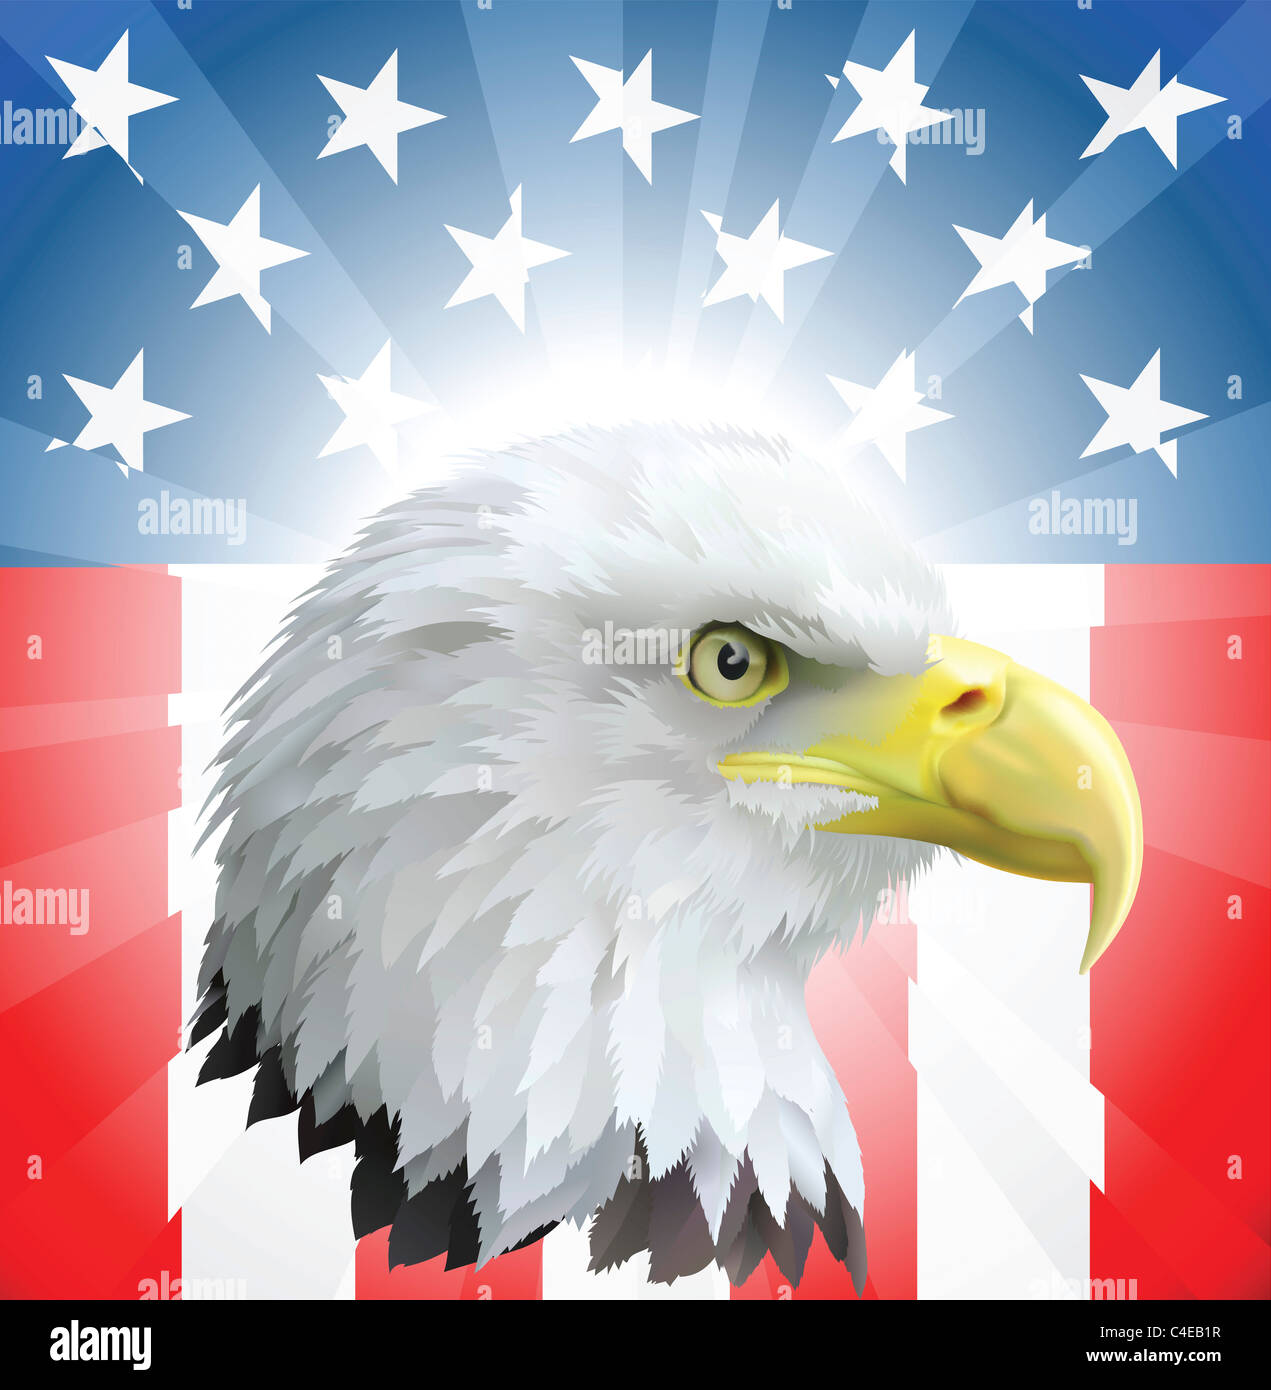 A background featuring American eagle and stars and stripes background Stock Photo